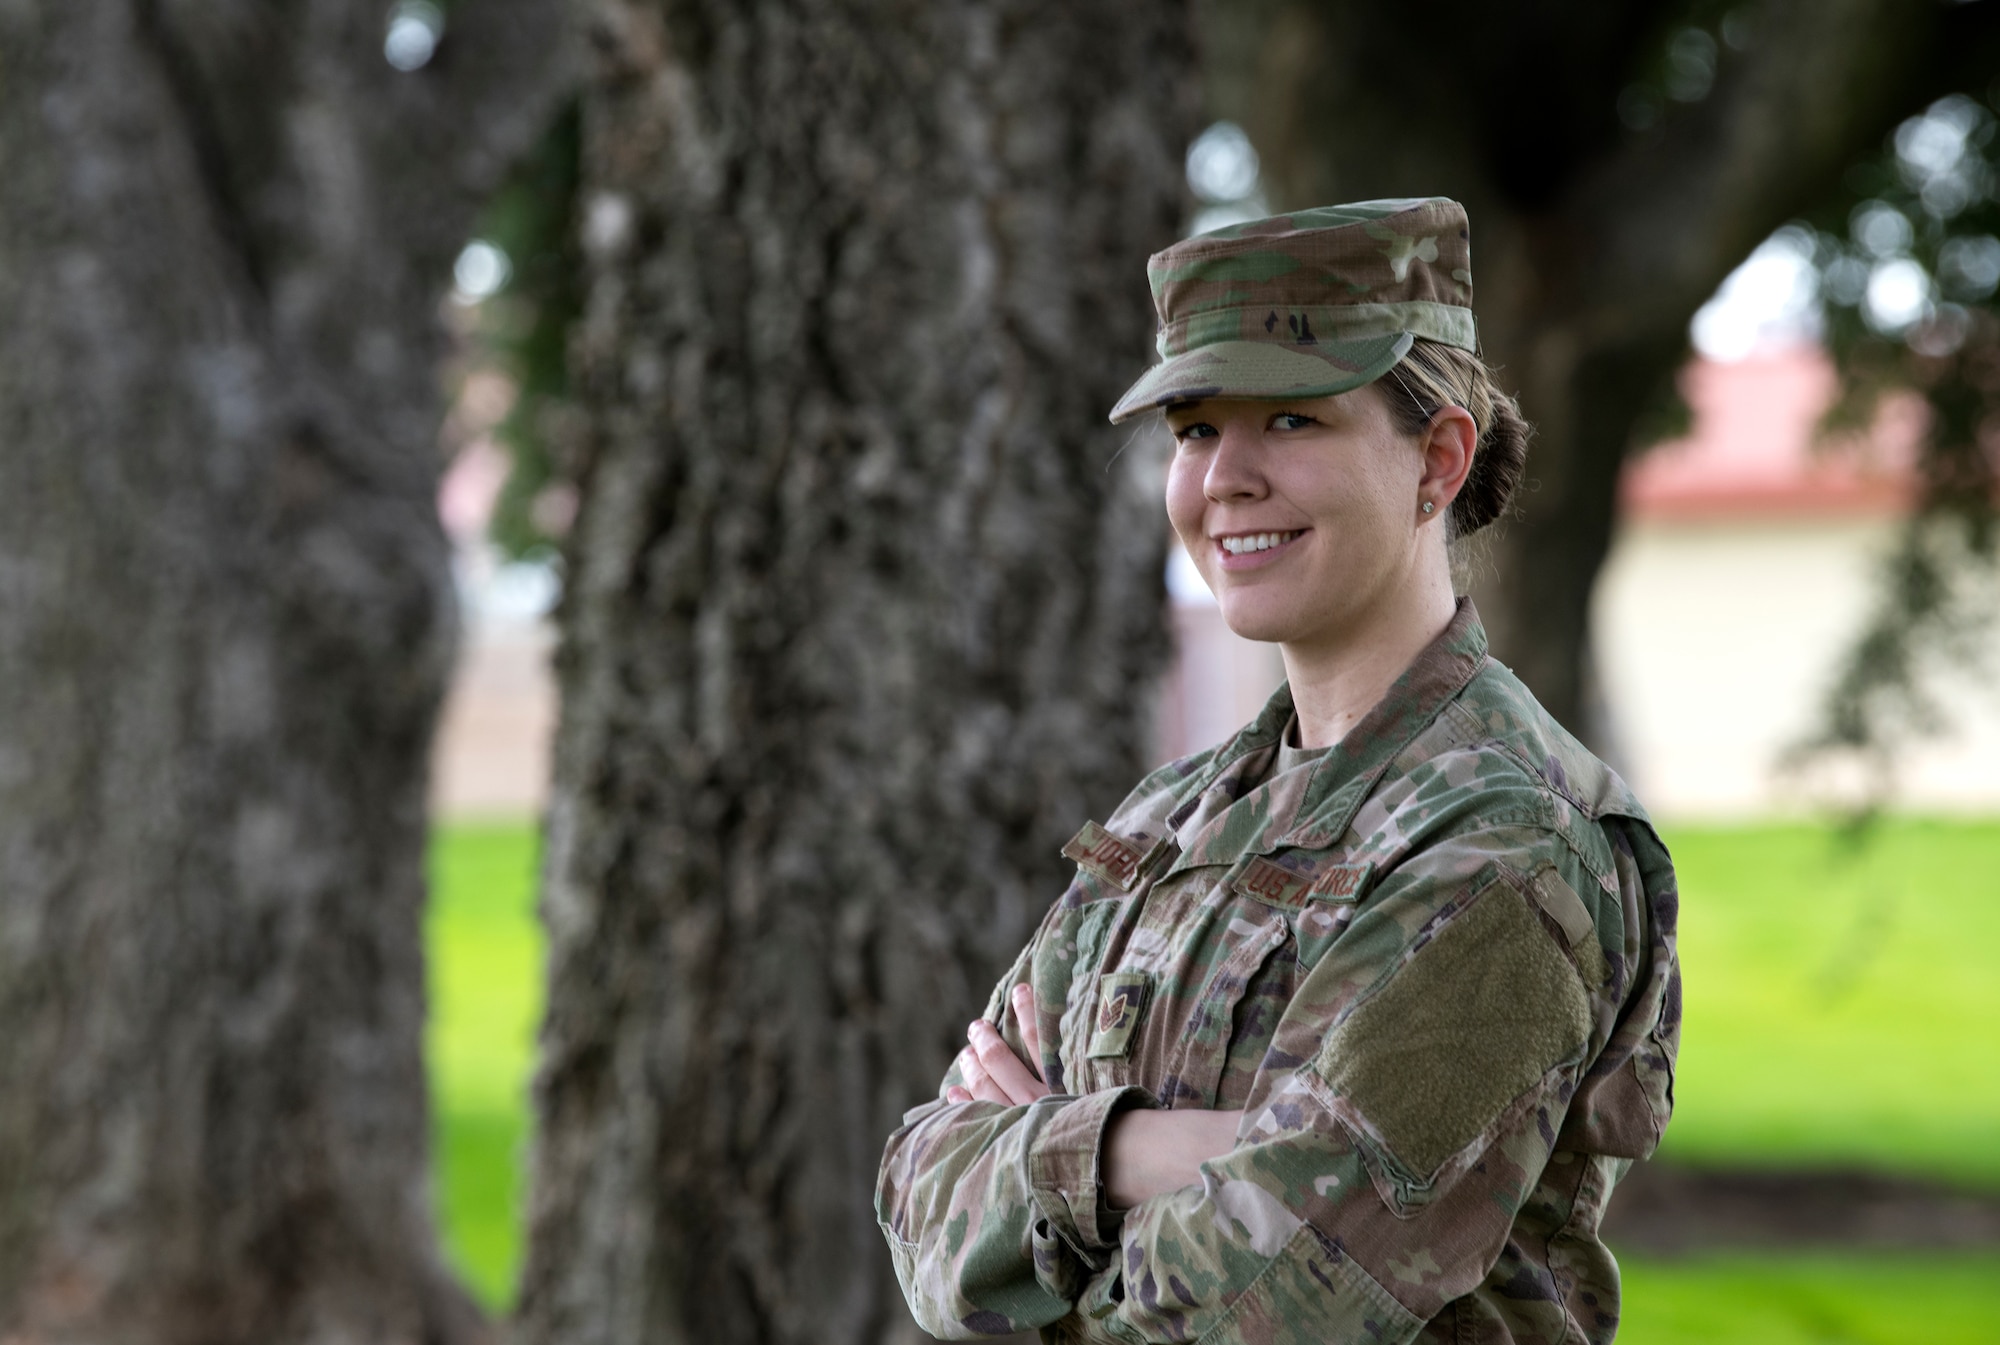 Staff Sgt. Emily Johnson, 349th Aeromedical Staging Squadron admin assistant, poses for a photo at Travis Air Force Base, Calif., on March 4, 2019. In January, Johnson helped save lives in a multiple car crash on Interstate 80 near Fairfield, Calif. during rush hour. (U.S. Air Force photo by Staff Sgt. Daniel Phelps)